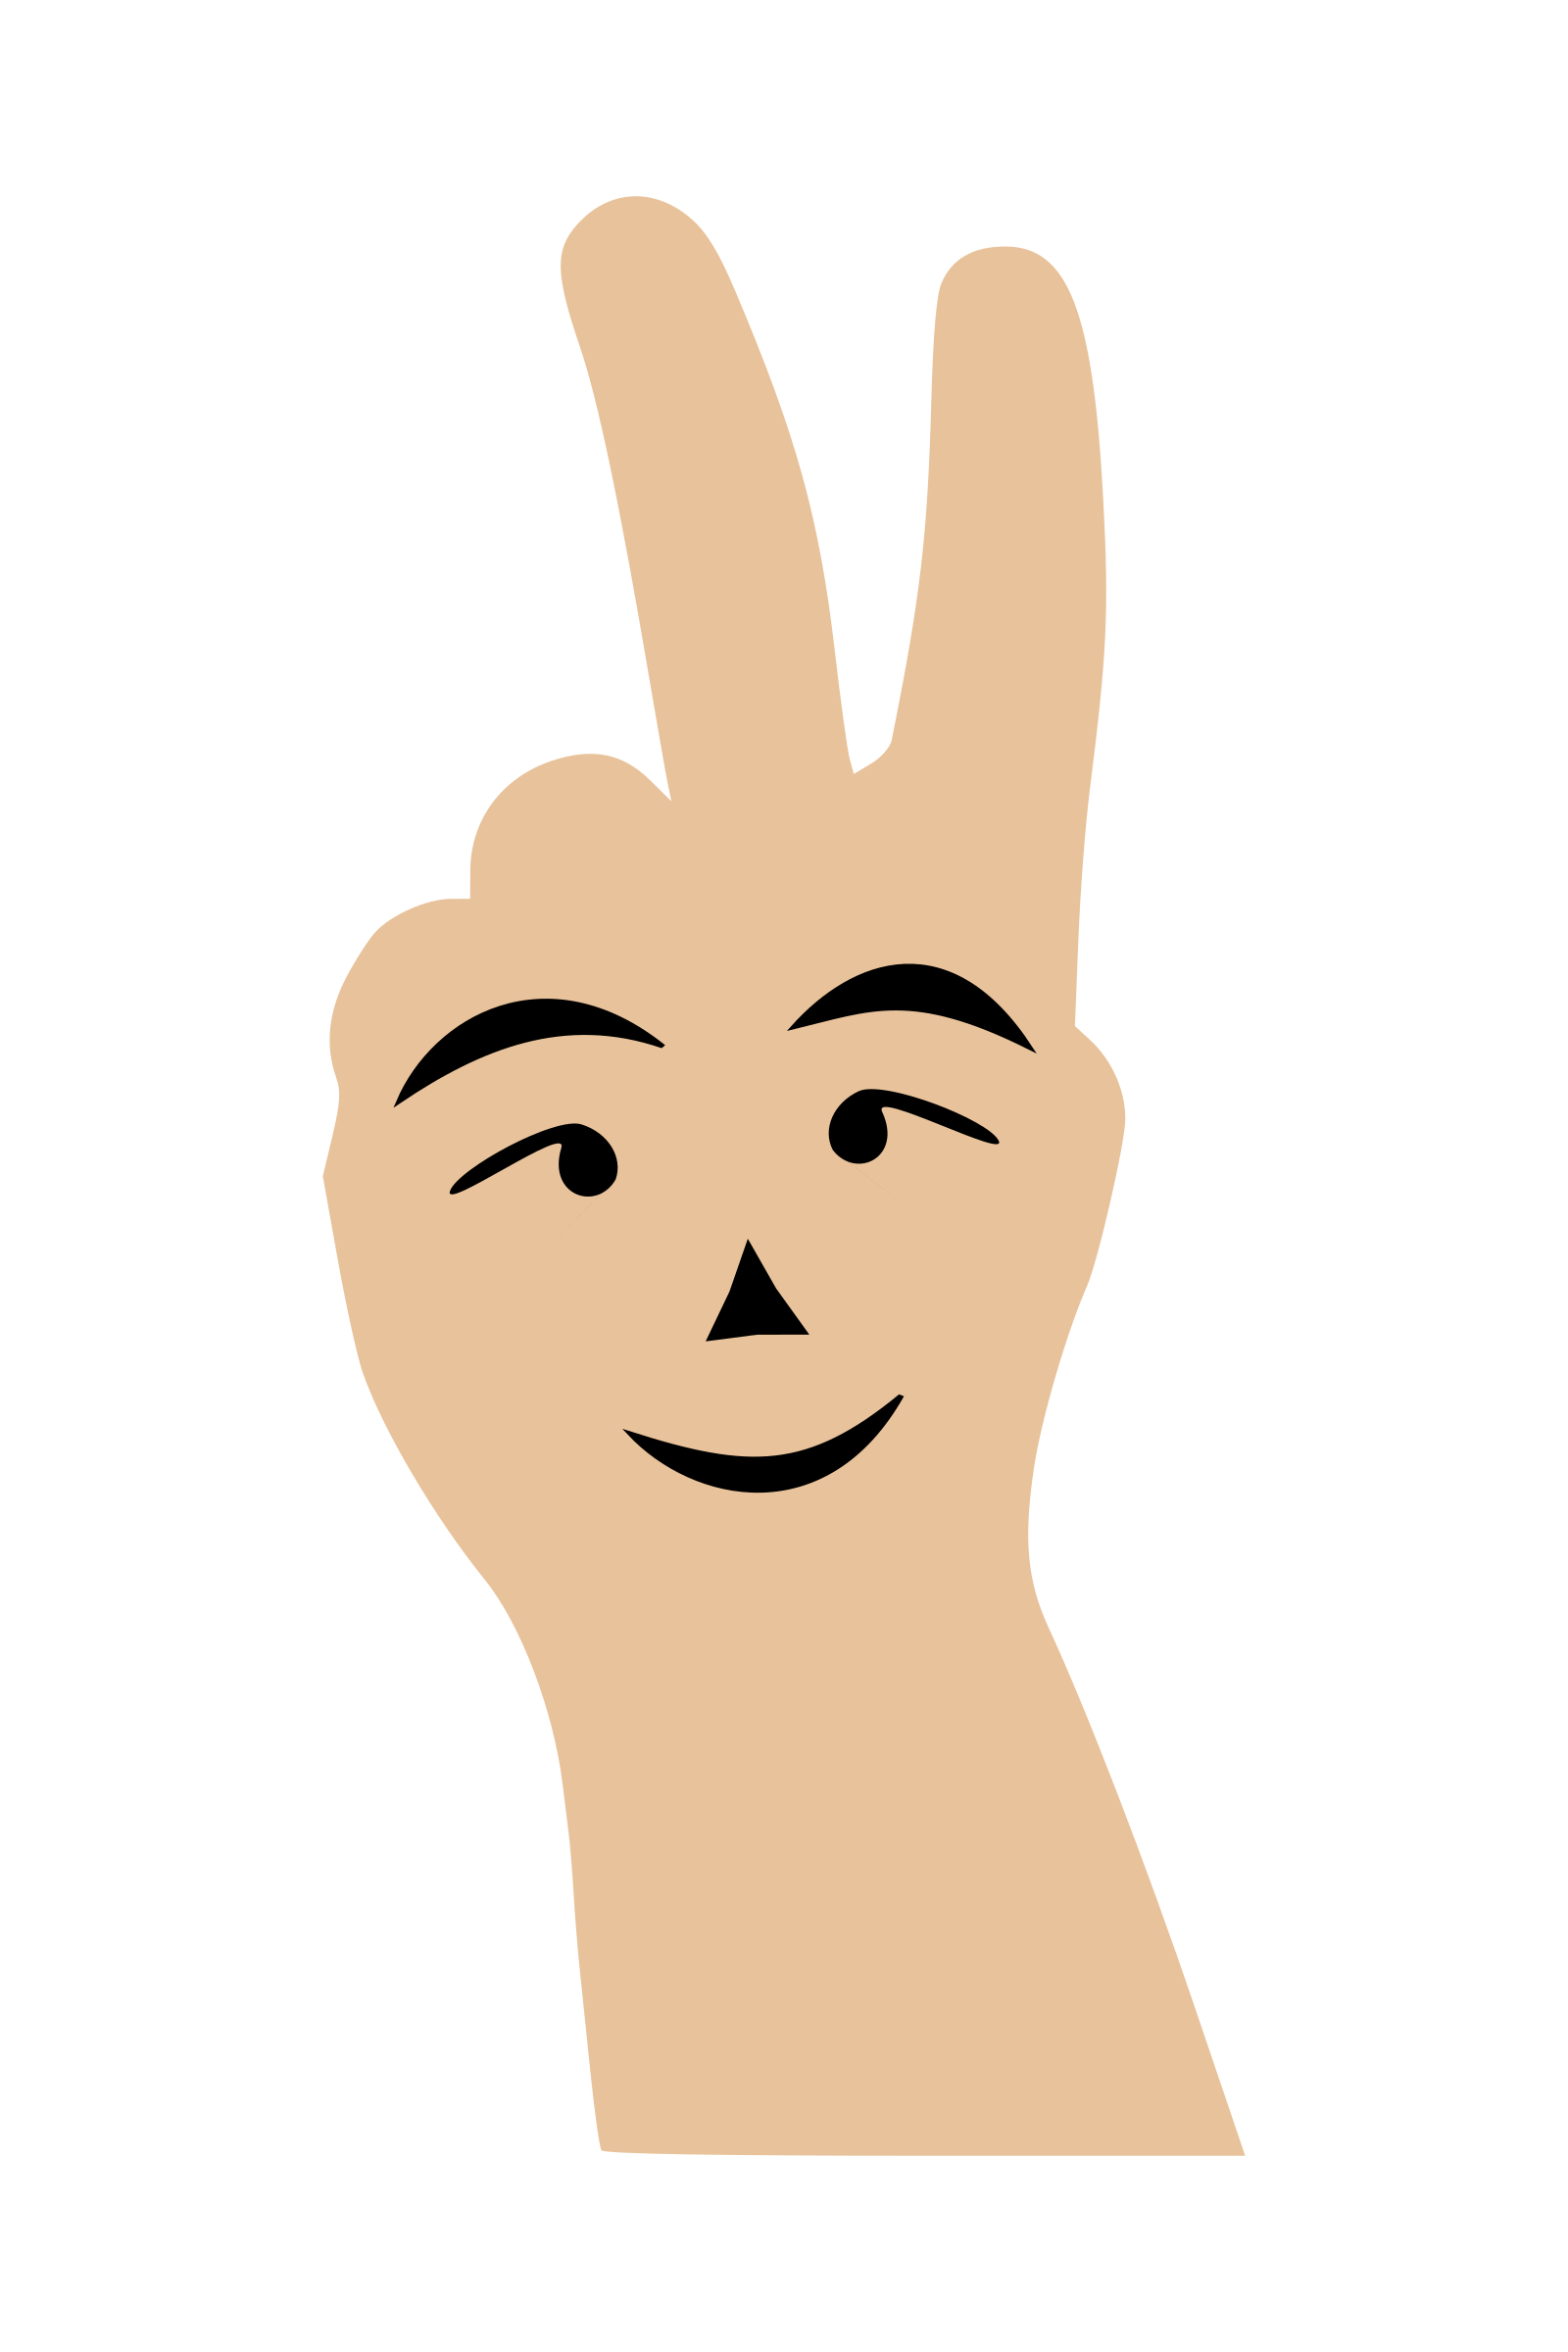 Skin clipart big hand. Peace sign anthropomorphism image